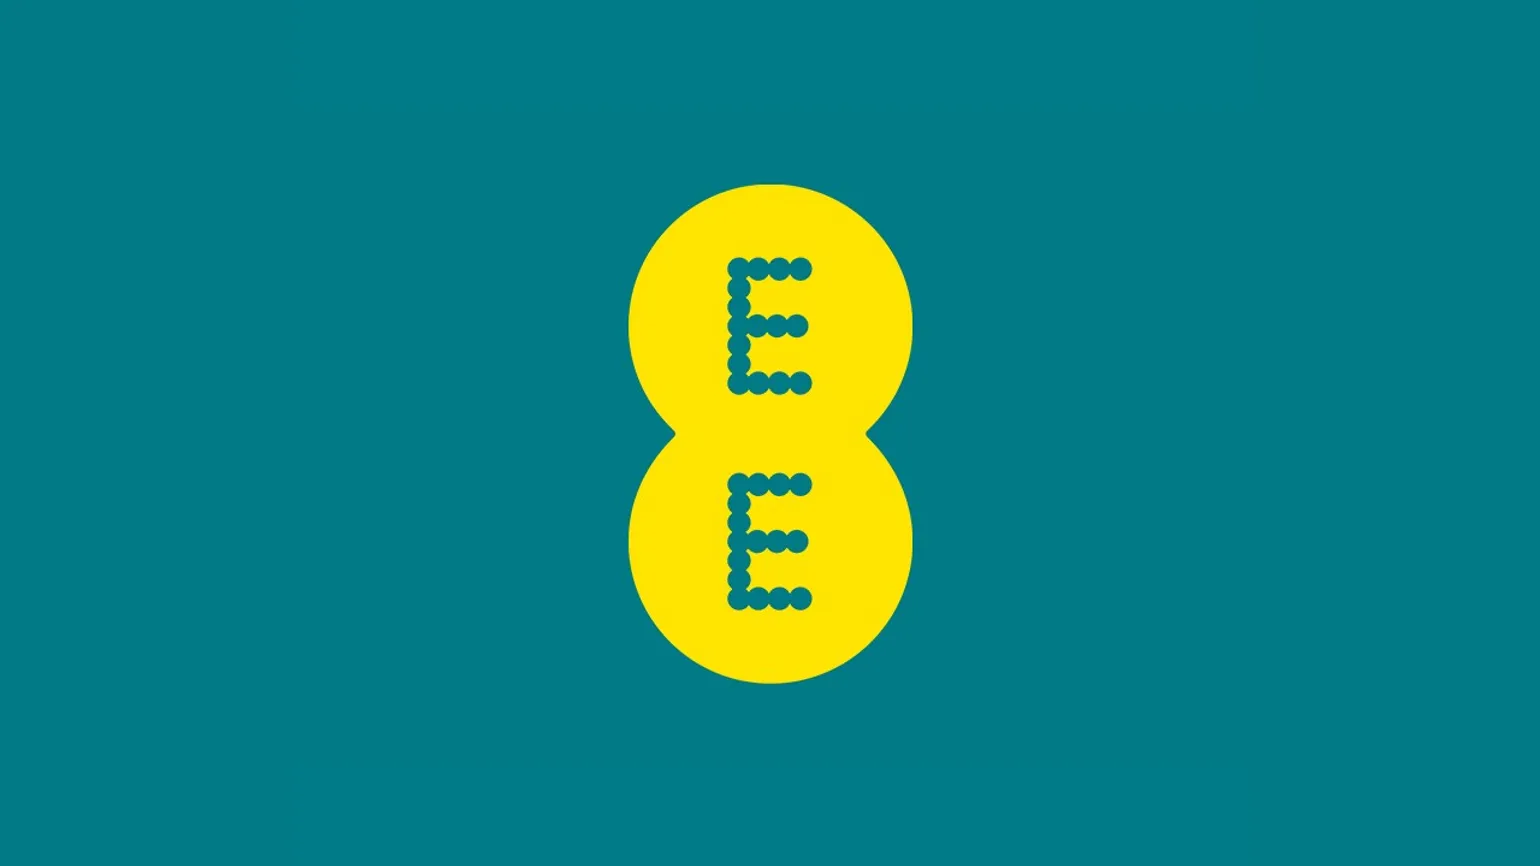 EE to move away from inflation based price rises later this year